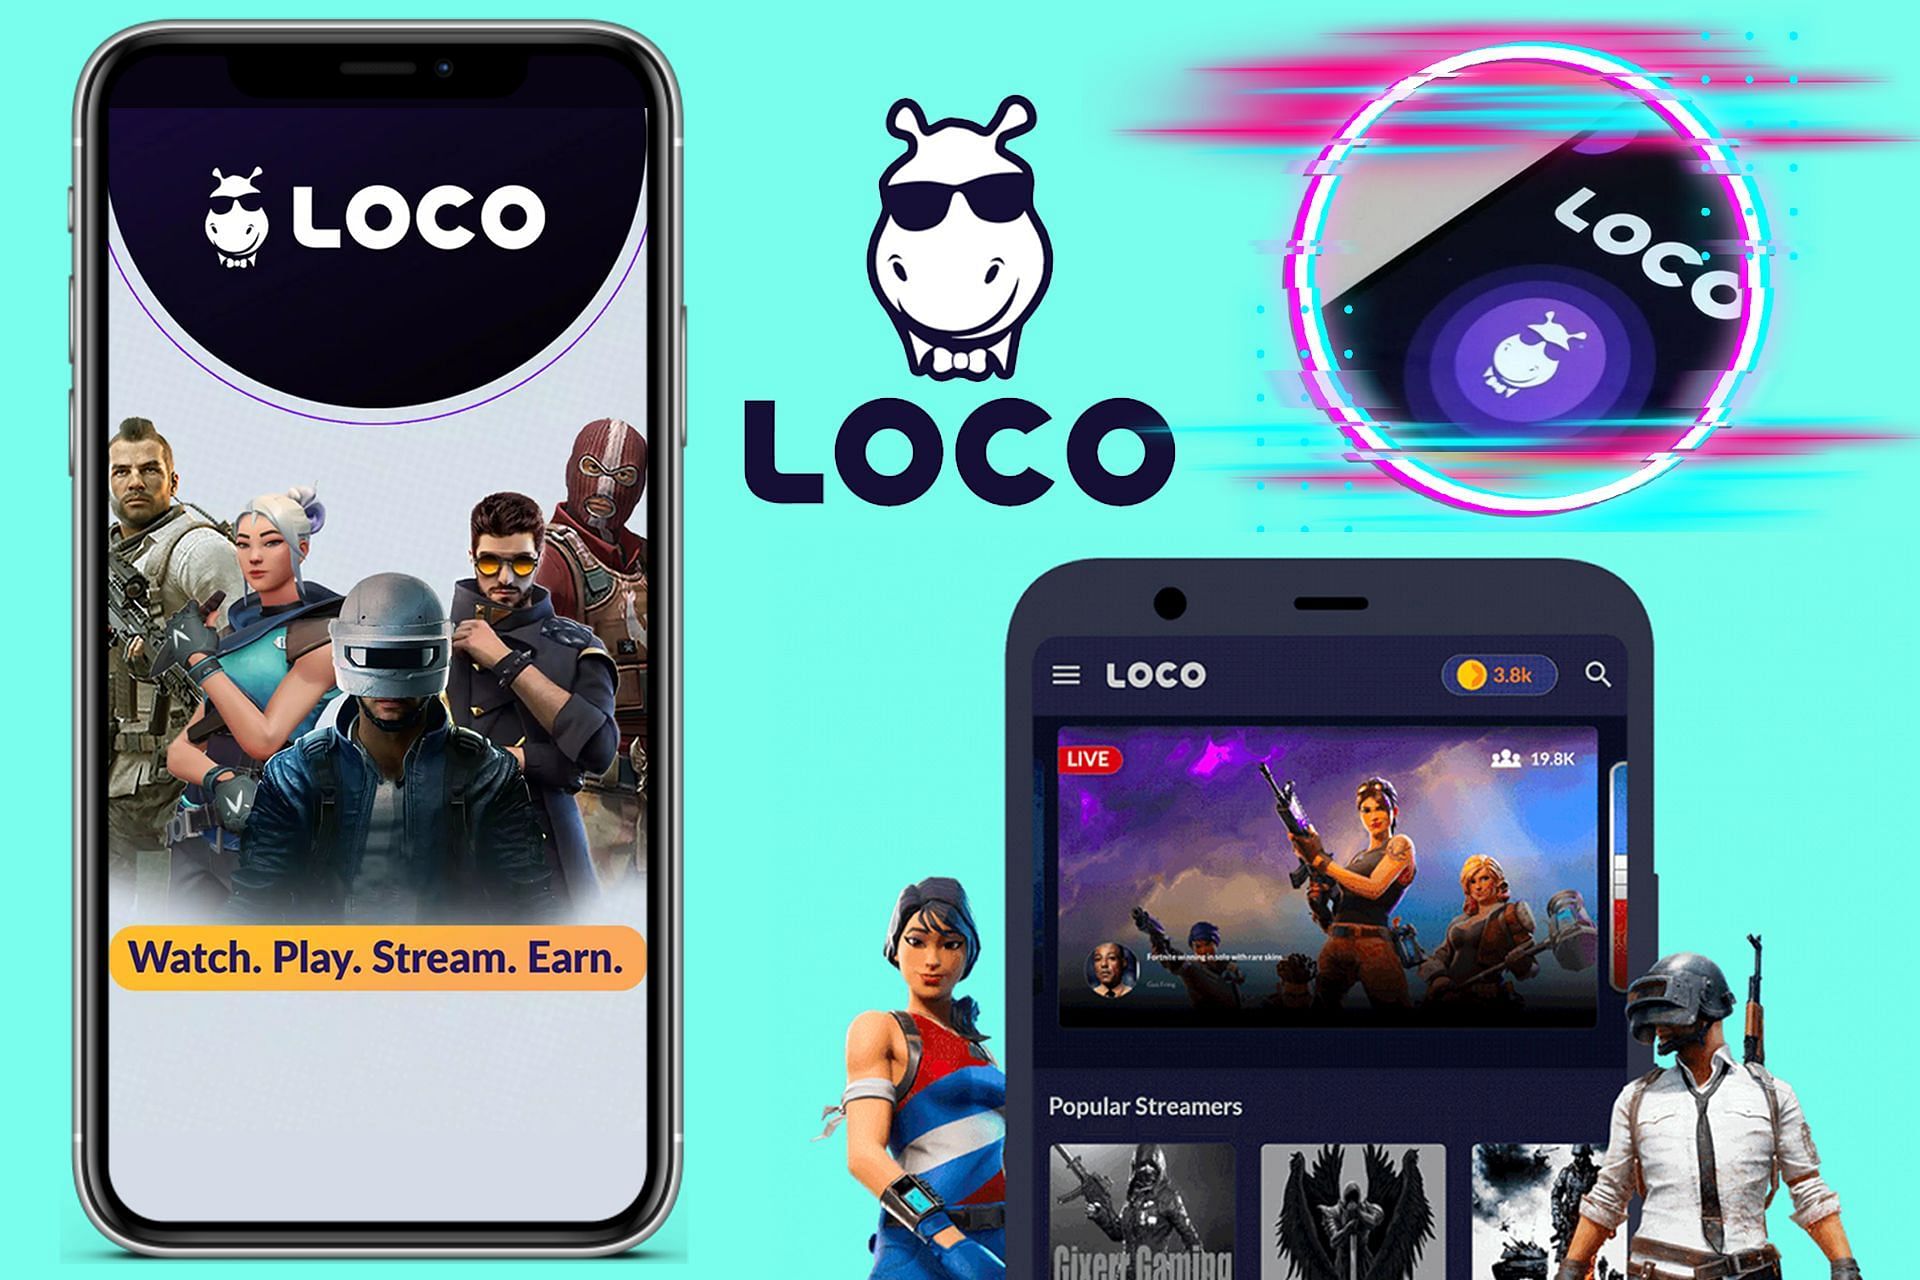 Listing the best features and updates of Loco (Image via Sportskeeda)